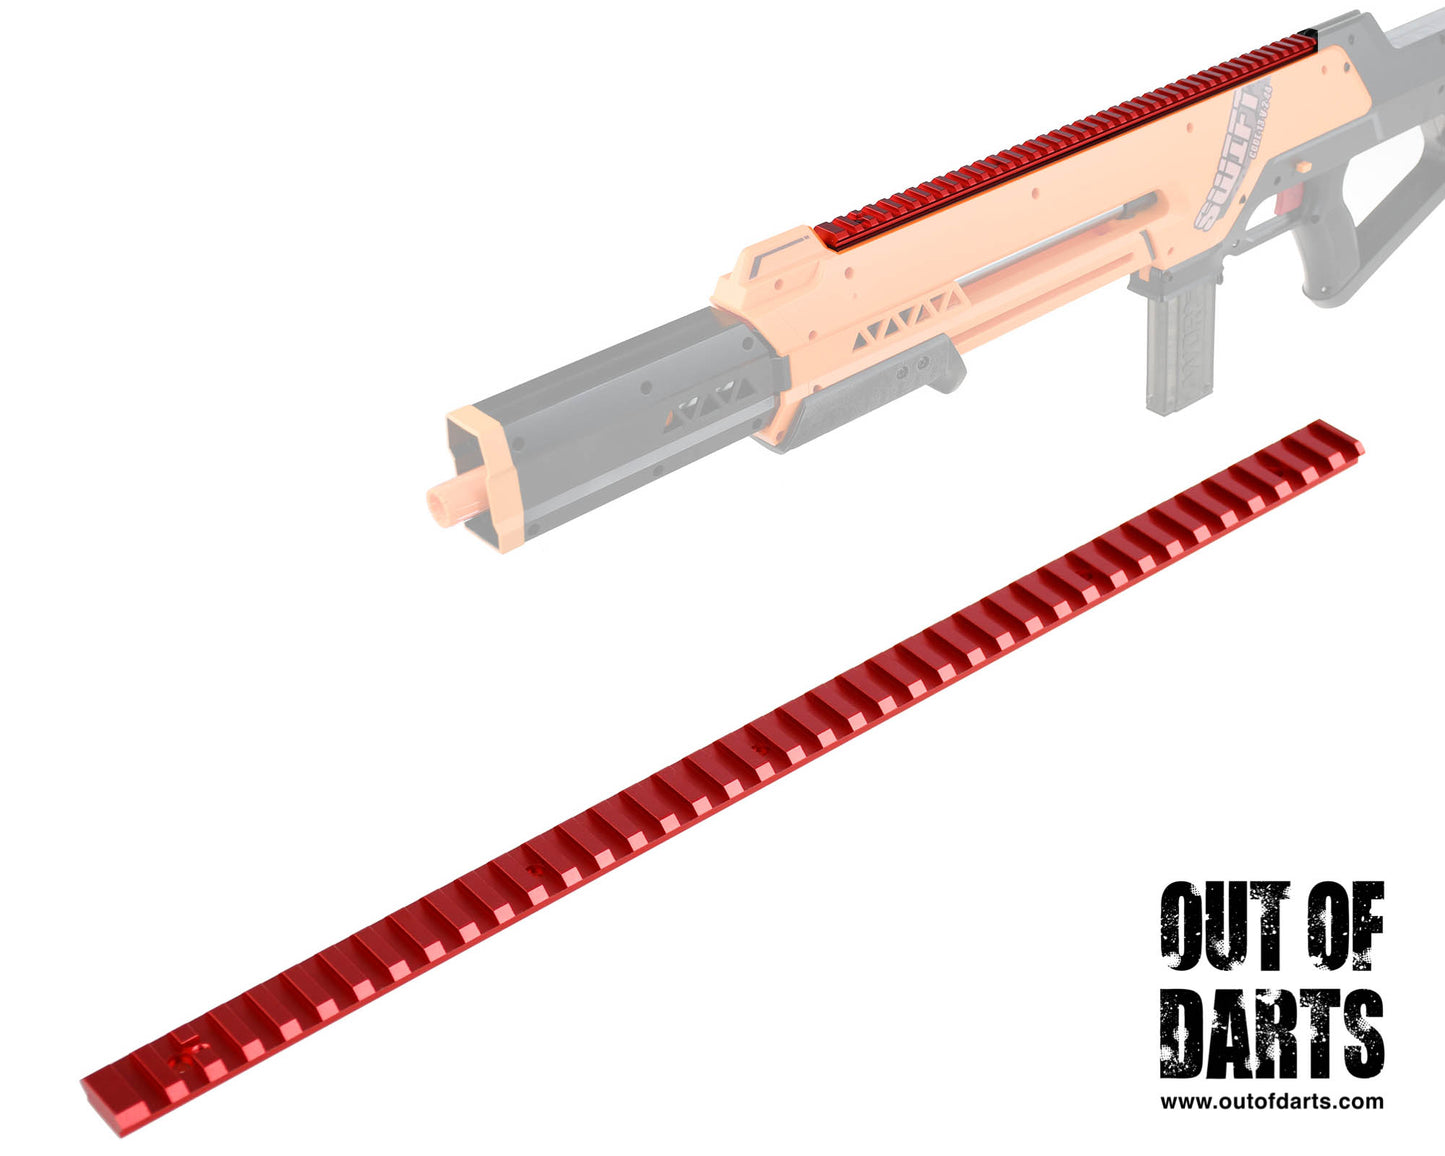 Worker Aluminum Picatinny Rail for Swift Blaster CLOSEOUT